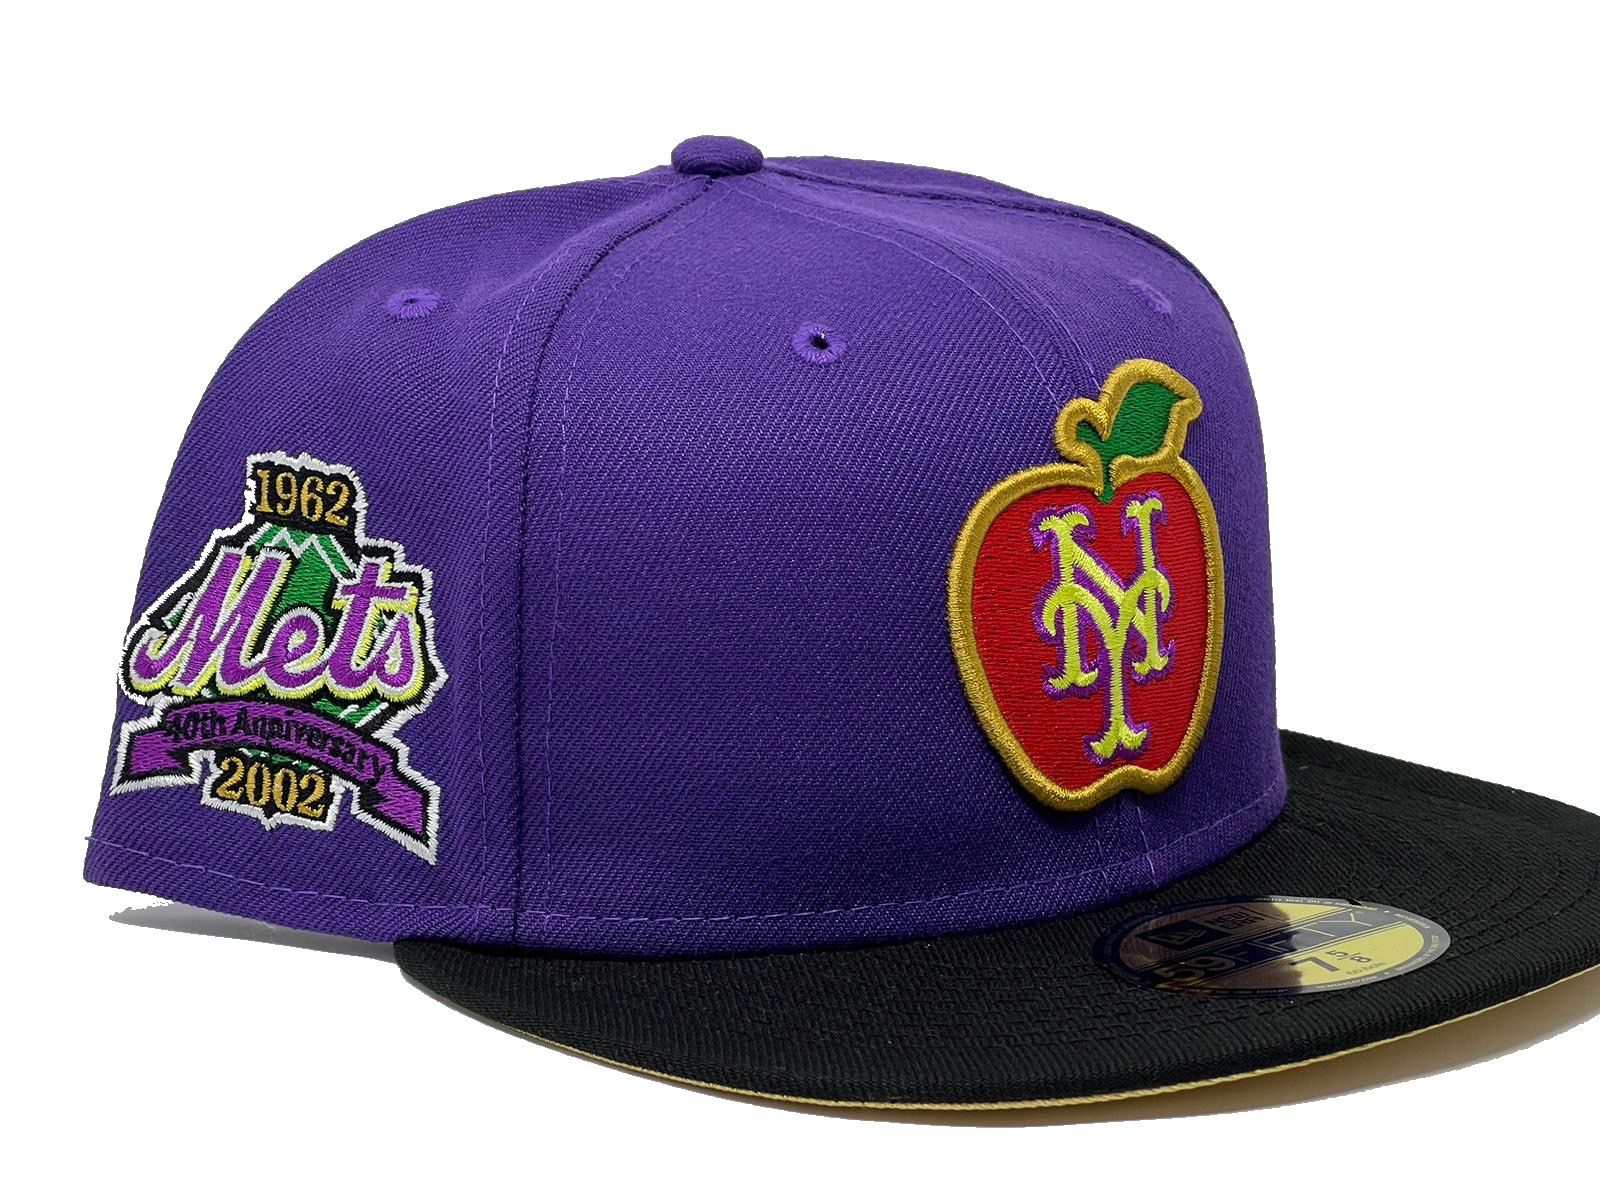 Lids Good Vs Evil 59Fifty Fitted Hat Collection by MLB x New Era